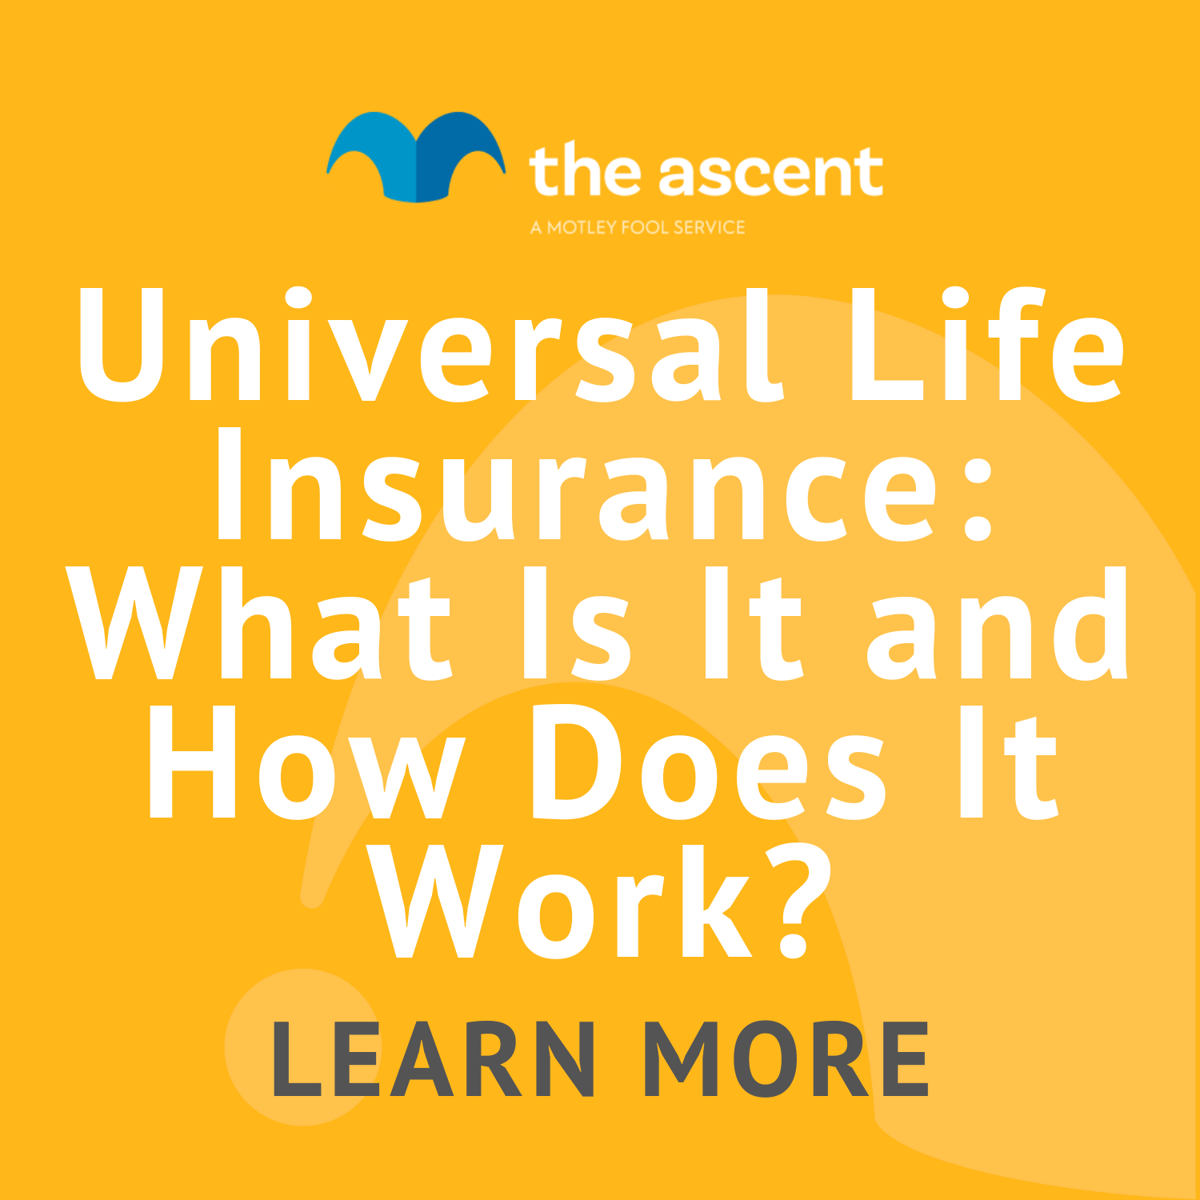 Universal Life Insurance: What Is It?